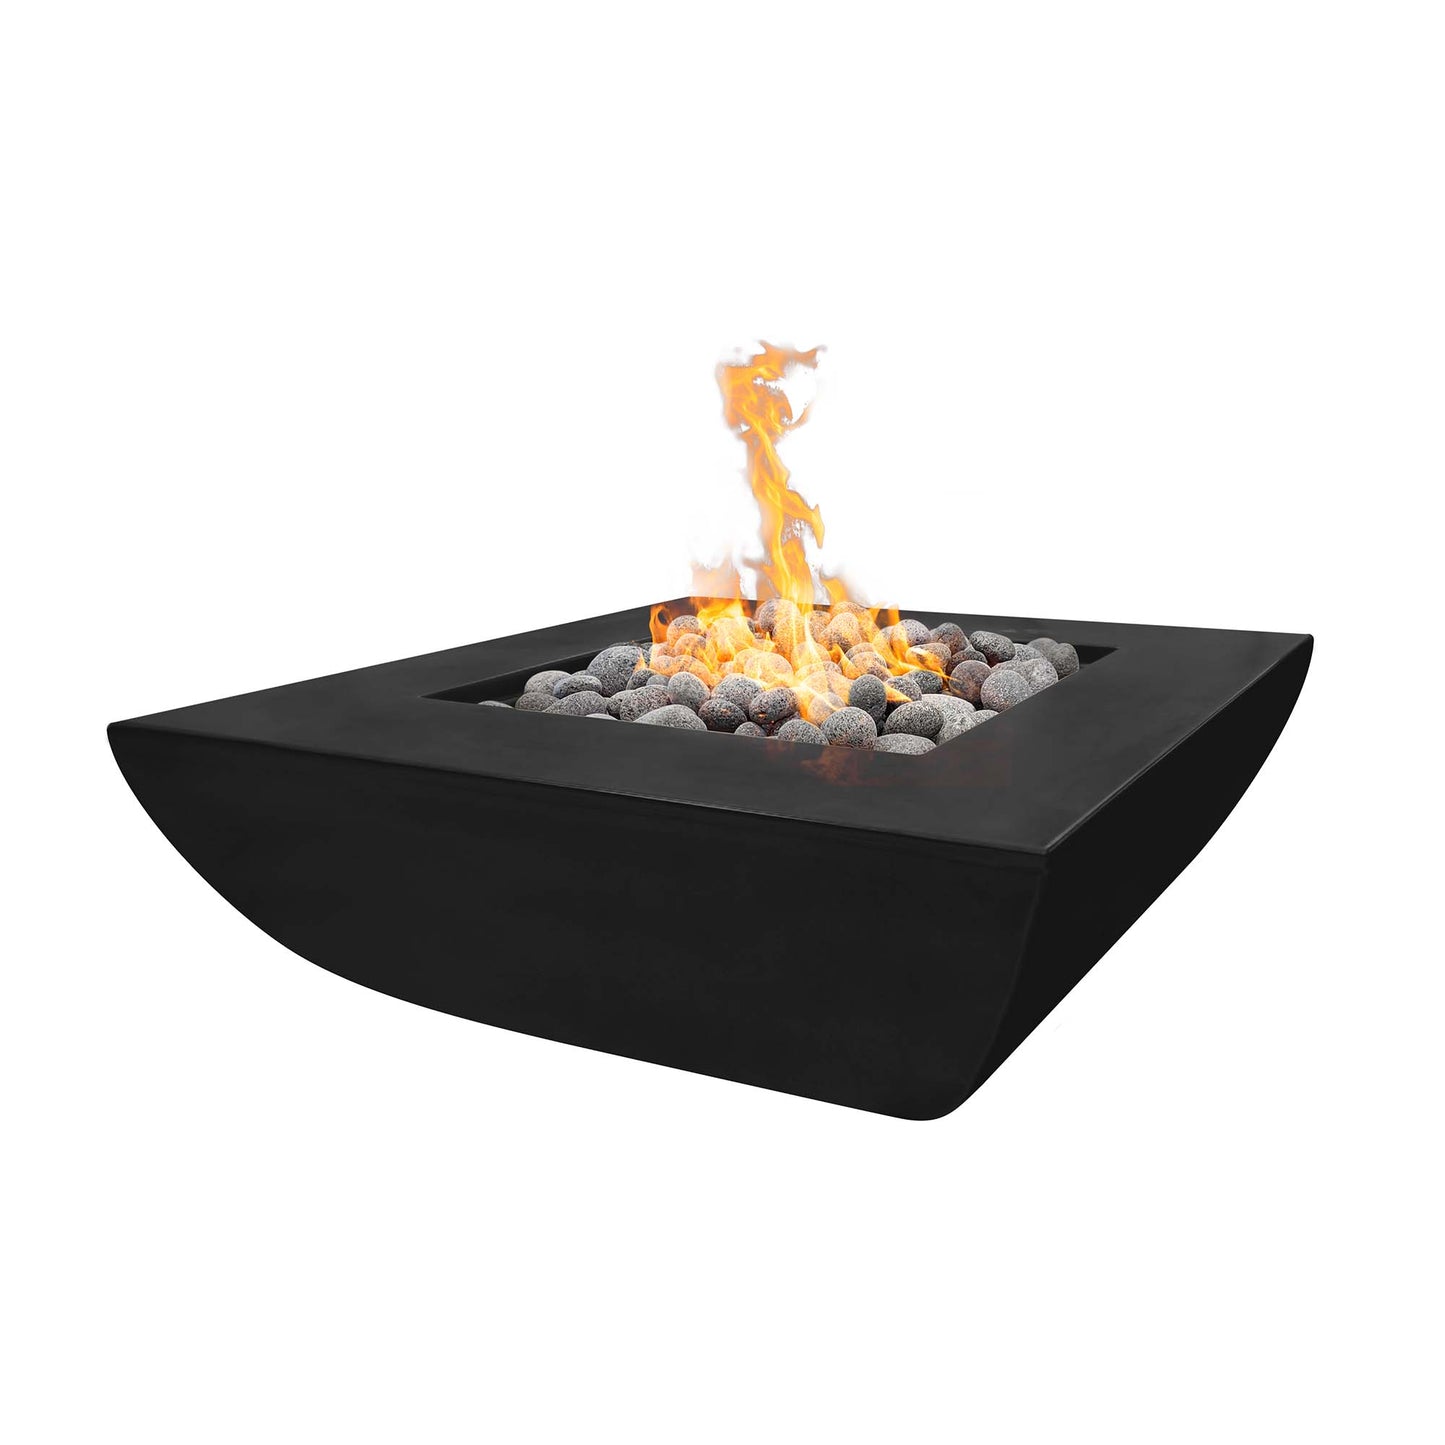 The Outdoor Plus Square Avalon 42" Black GFRC Concrete Natural Gas Fire Pit with 110V Electronic Ignition